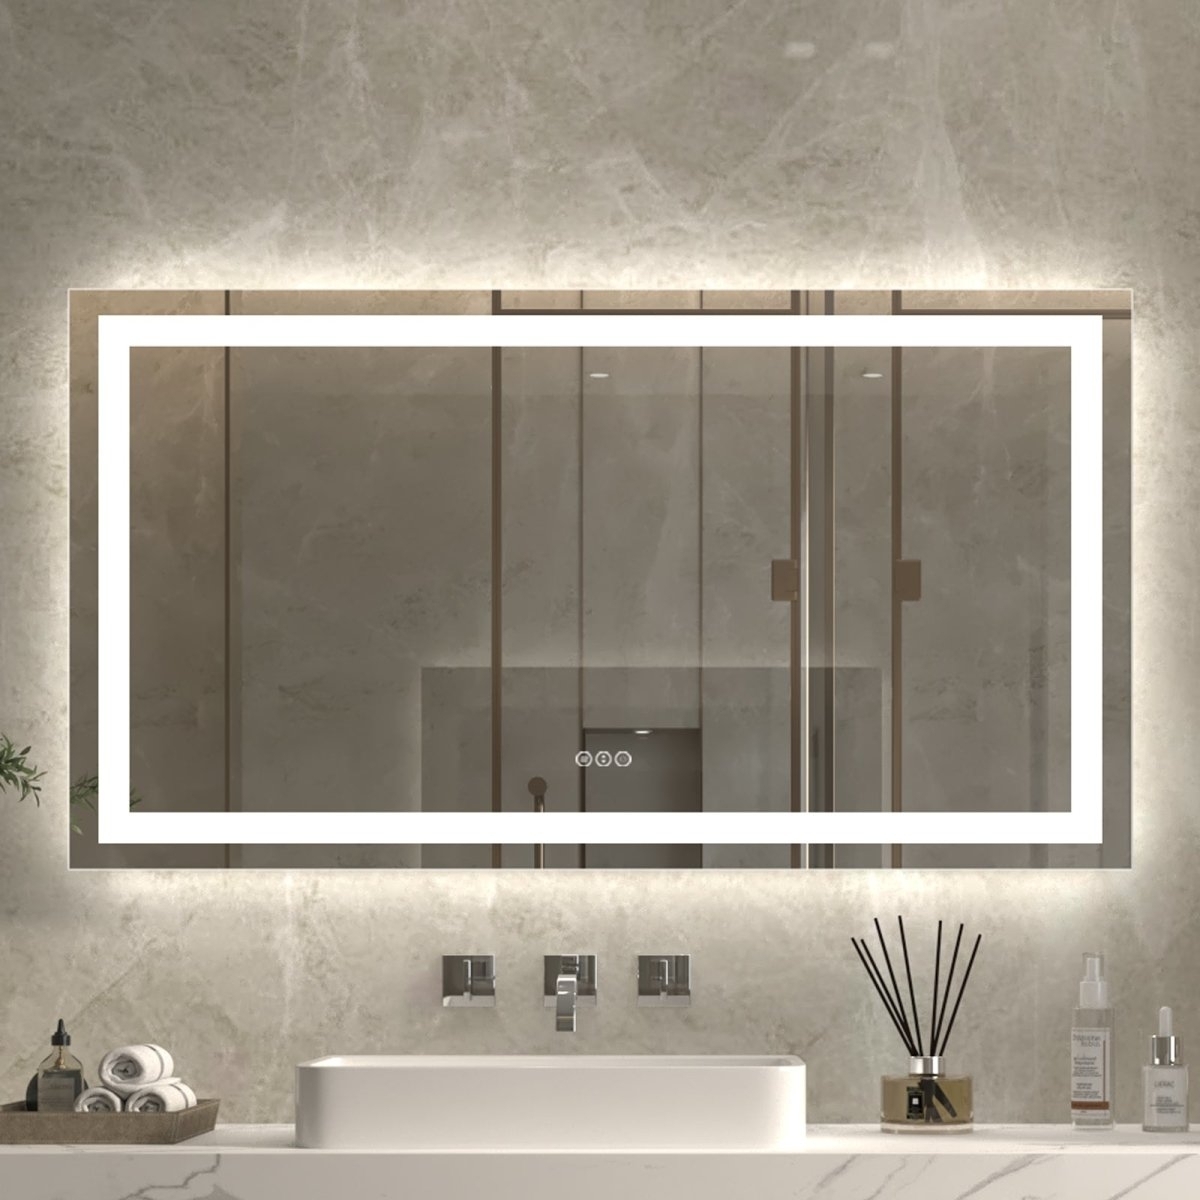 ExBrite 55" W x 30" H LED Bathroom Light Mirror,Anti Fog,Dimmable,Dual Lighting Mode,Tempered Glass